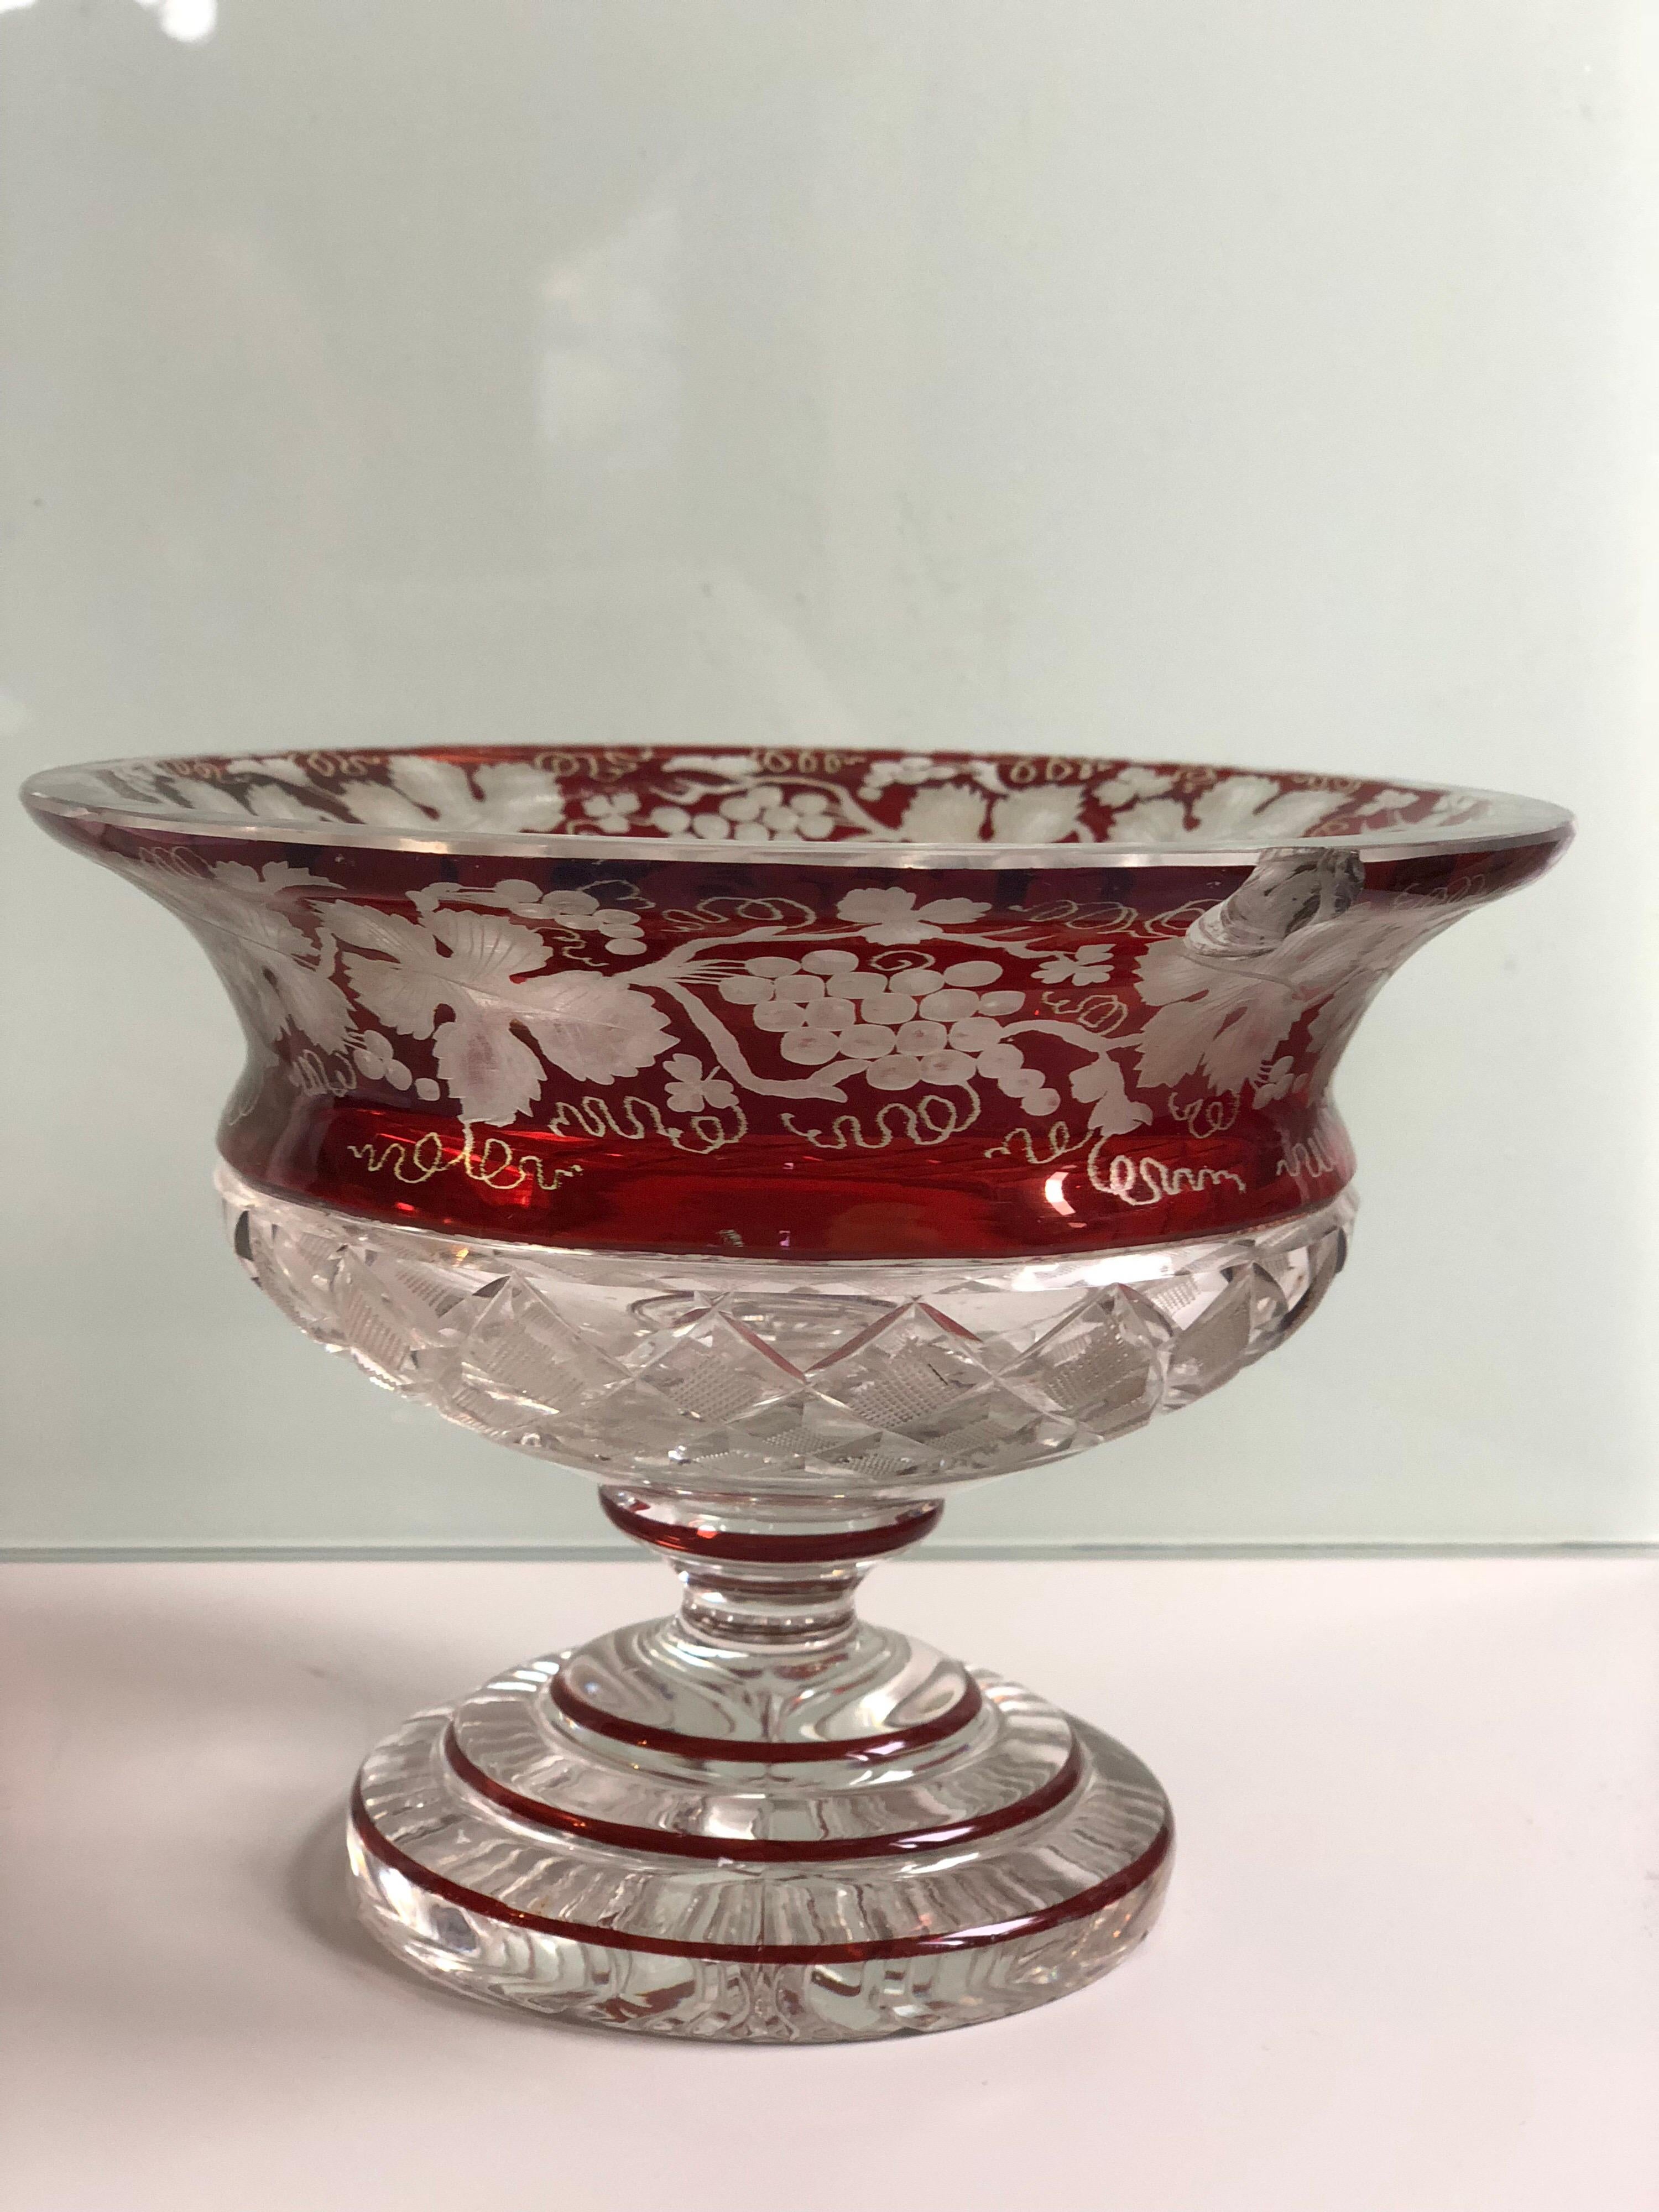 Bohemian ruby red cut-to-clear glass centerpiece.

The Egermann Company, dating back to the early 1800s, specializes in hand decorated glass with each piece posing a decorative and highly art oriented character. Egermann’s main claim to fame is